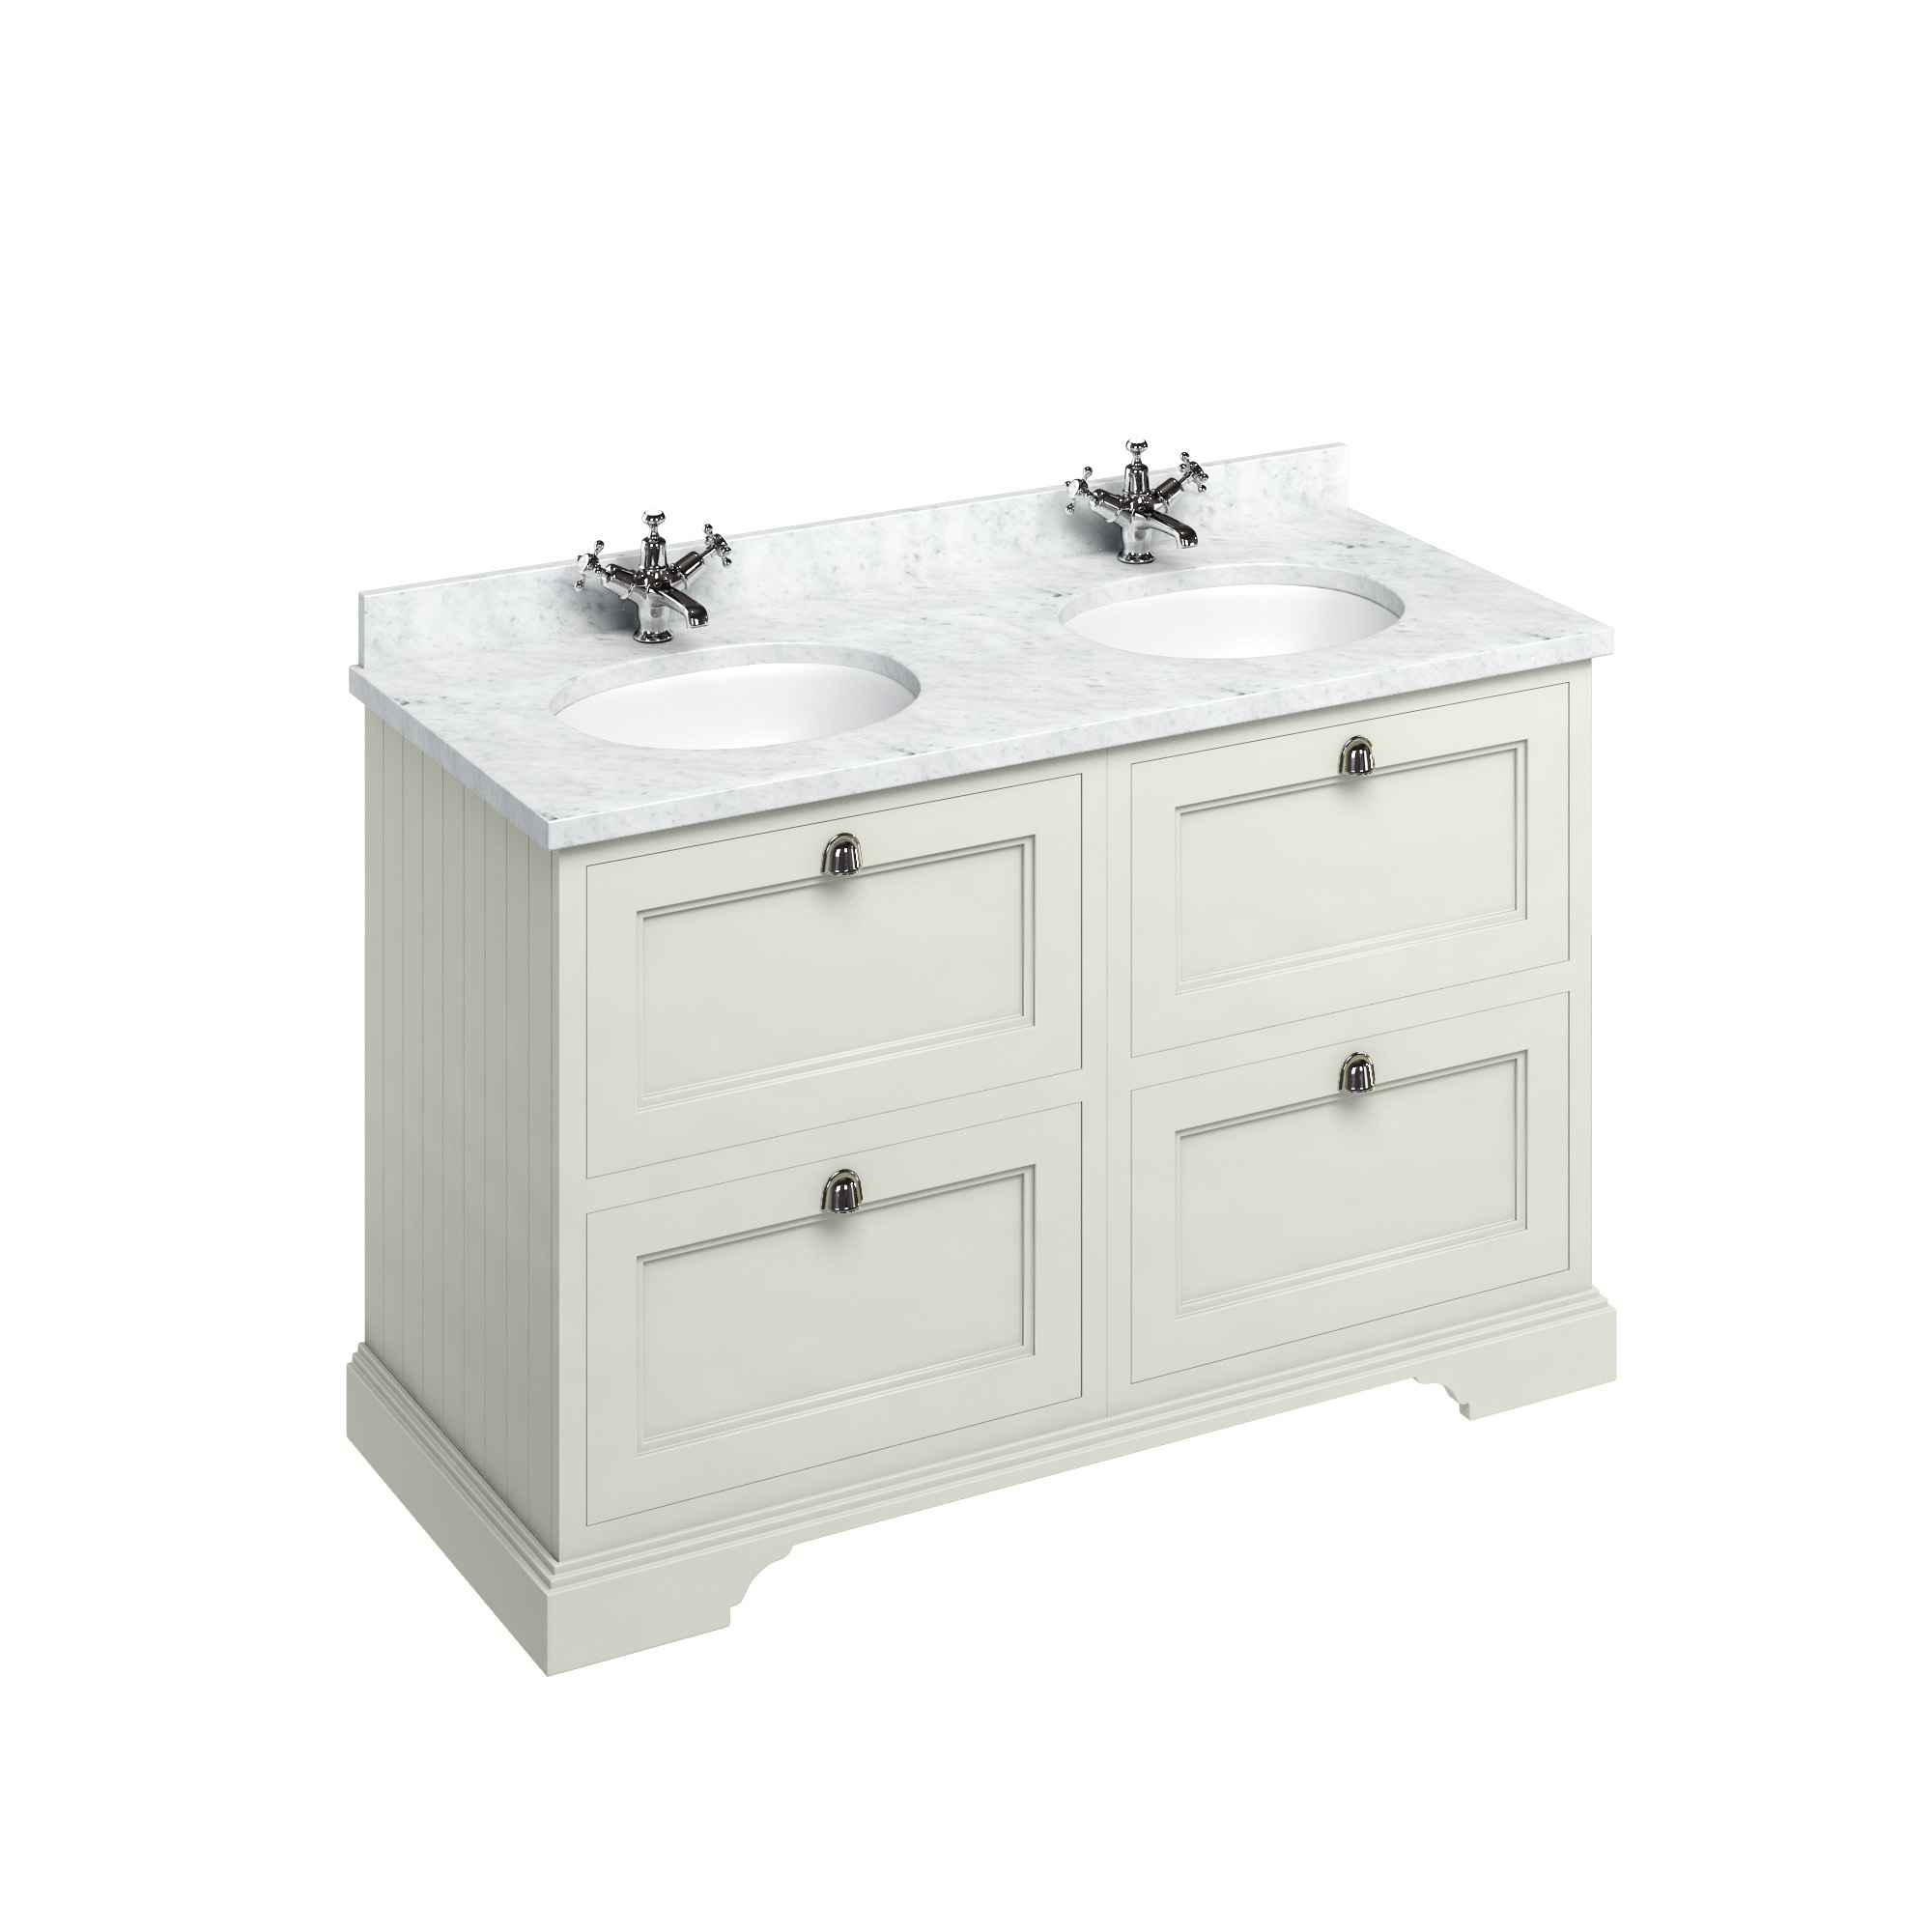 Freestanding 130 Vanity Unit with drawers - Sand and Minerva Carrara white worktop with two integrated white basins